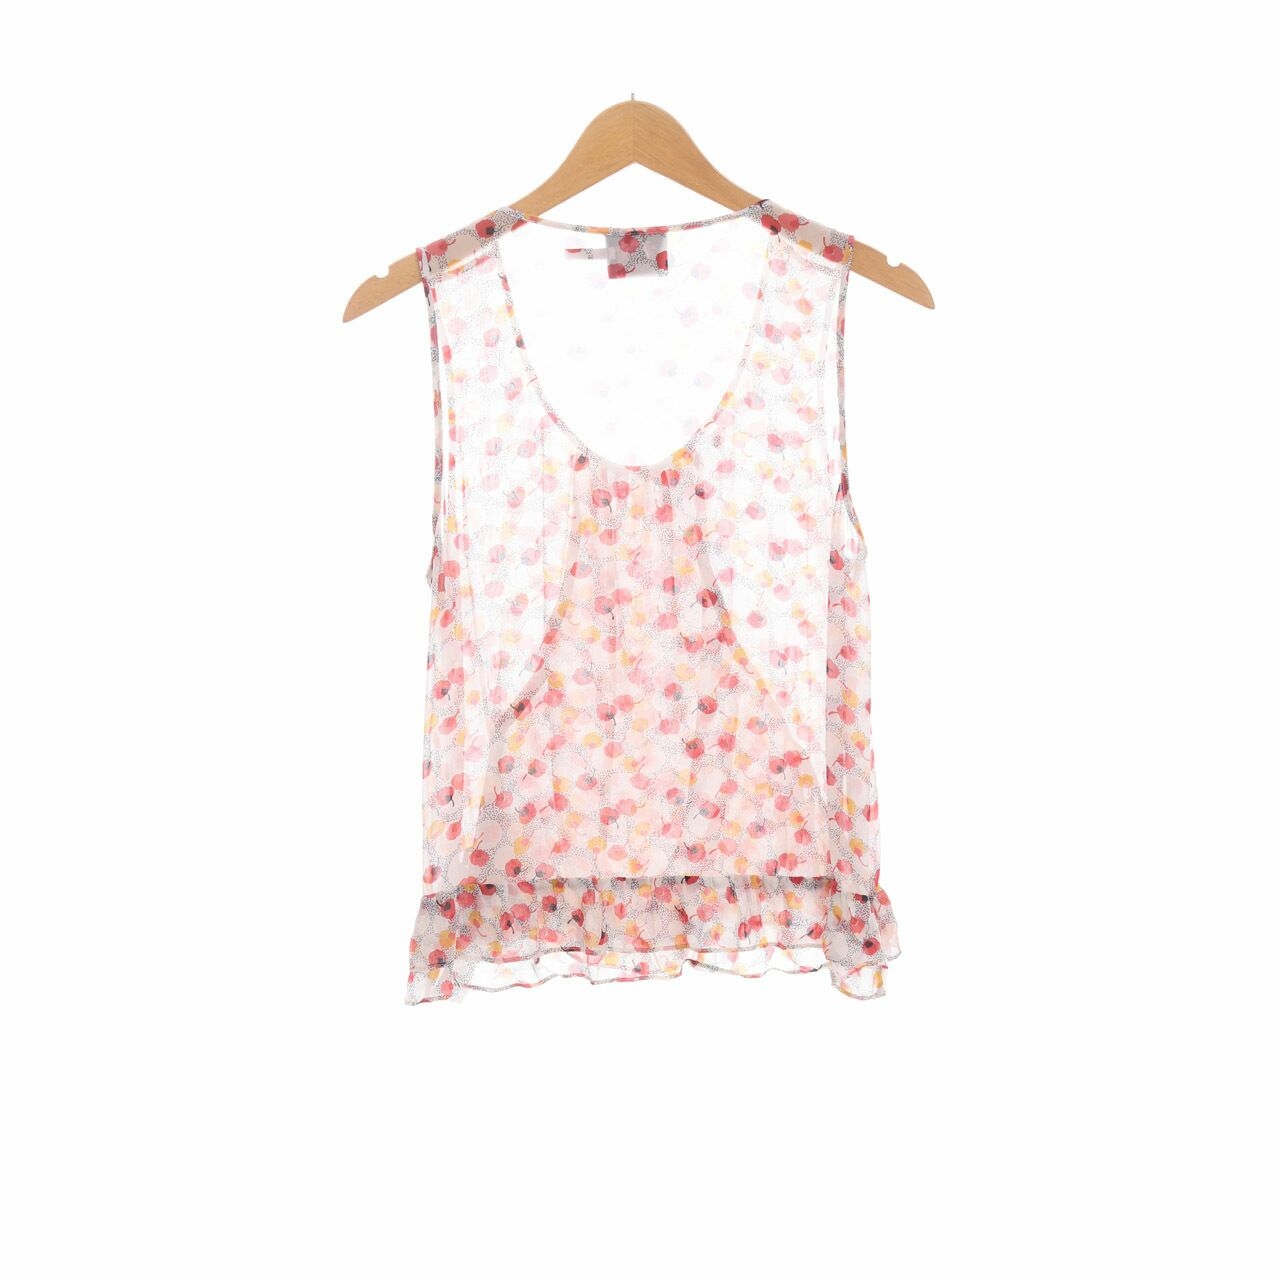 Juicy Couture Sheer Floral Print Sleeveless